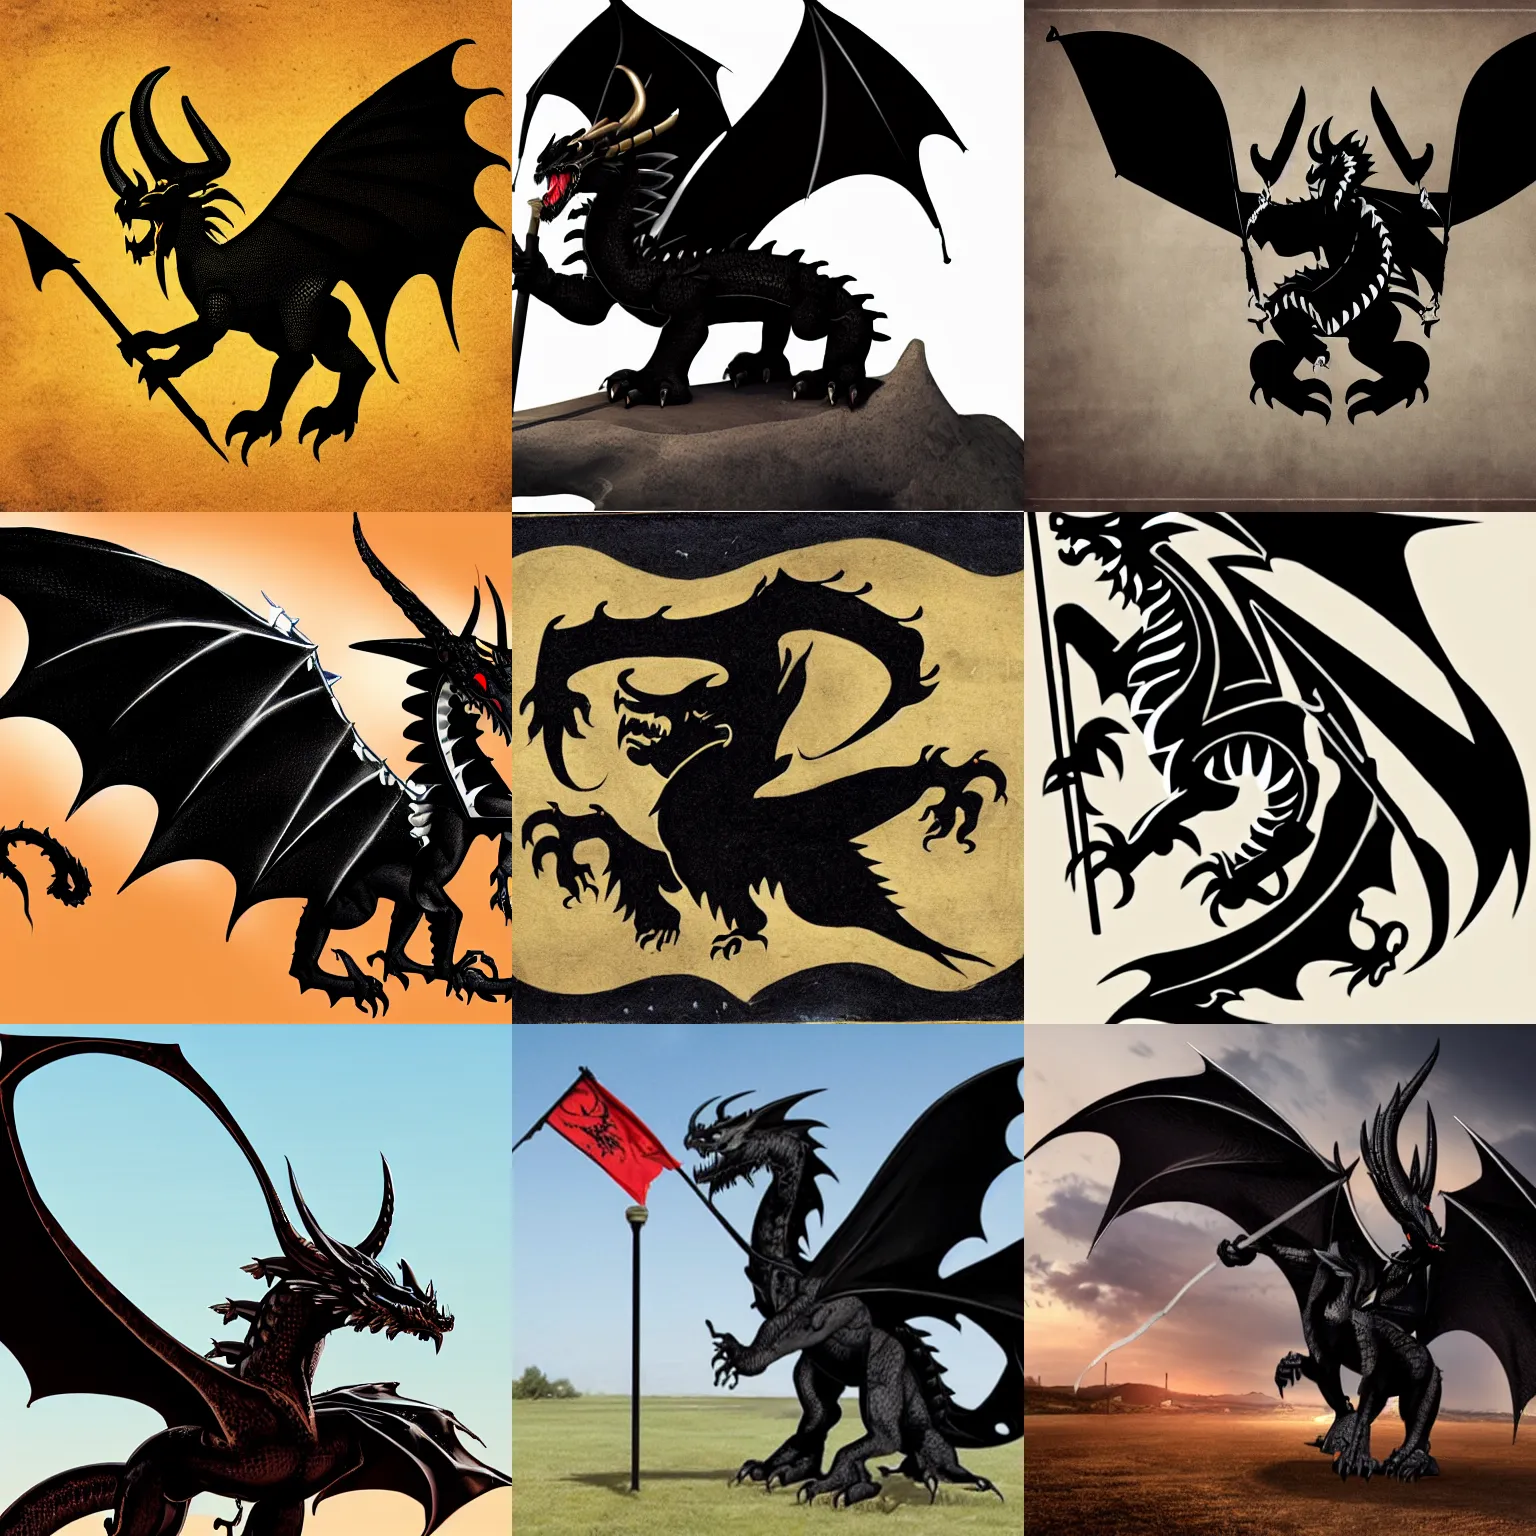 Prompt: a black western dragon with four horns, waving a flag with lambda symbol